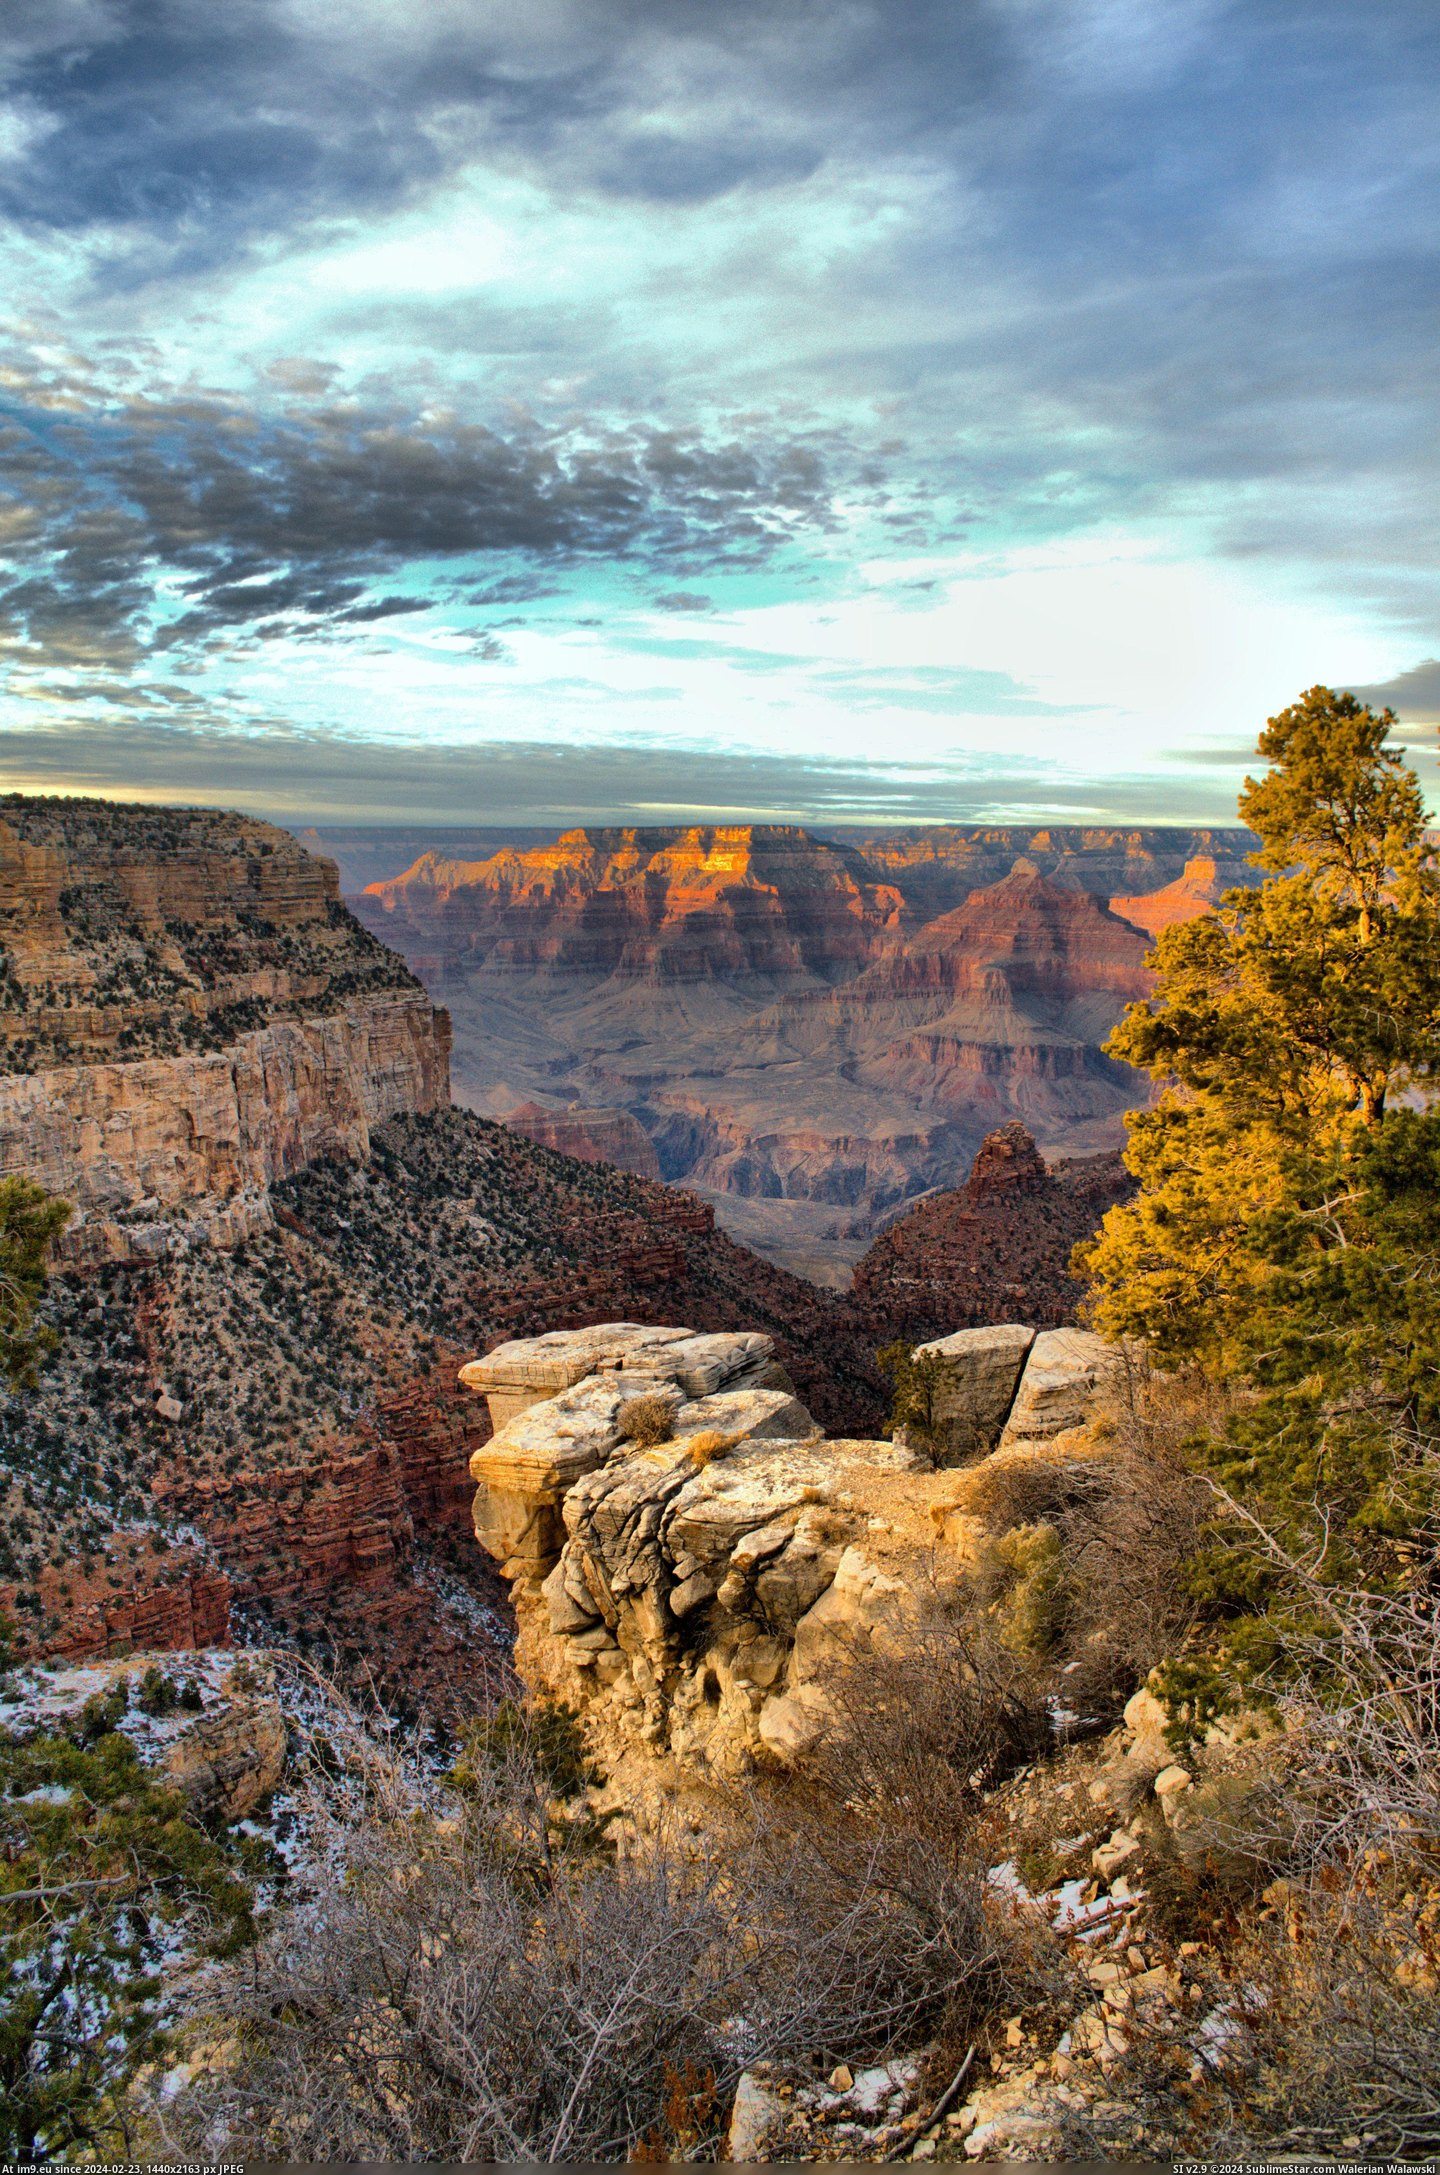 #Photo #One #Angel #Sunset #Trail #Bright #Bests #Personal #Winter #Canyon #Grand [Earthporn] A photo I took this winter at the Bright Angel Trail of the Grand Canyon during sunset. One of my personal bests. [O Pic. (Изображение из альбом My r/EARTHPORN favs))